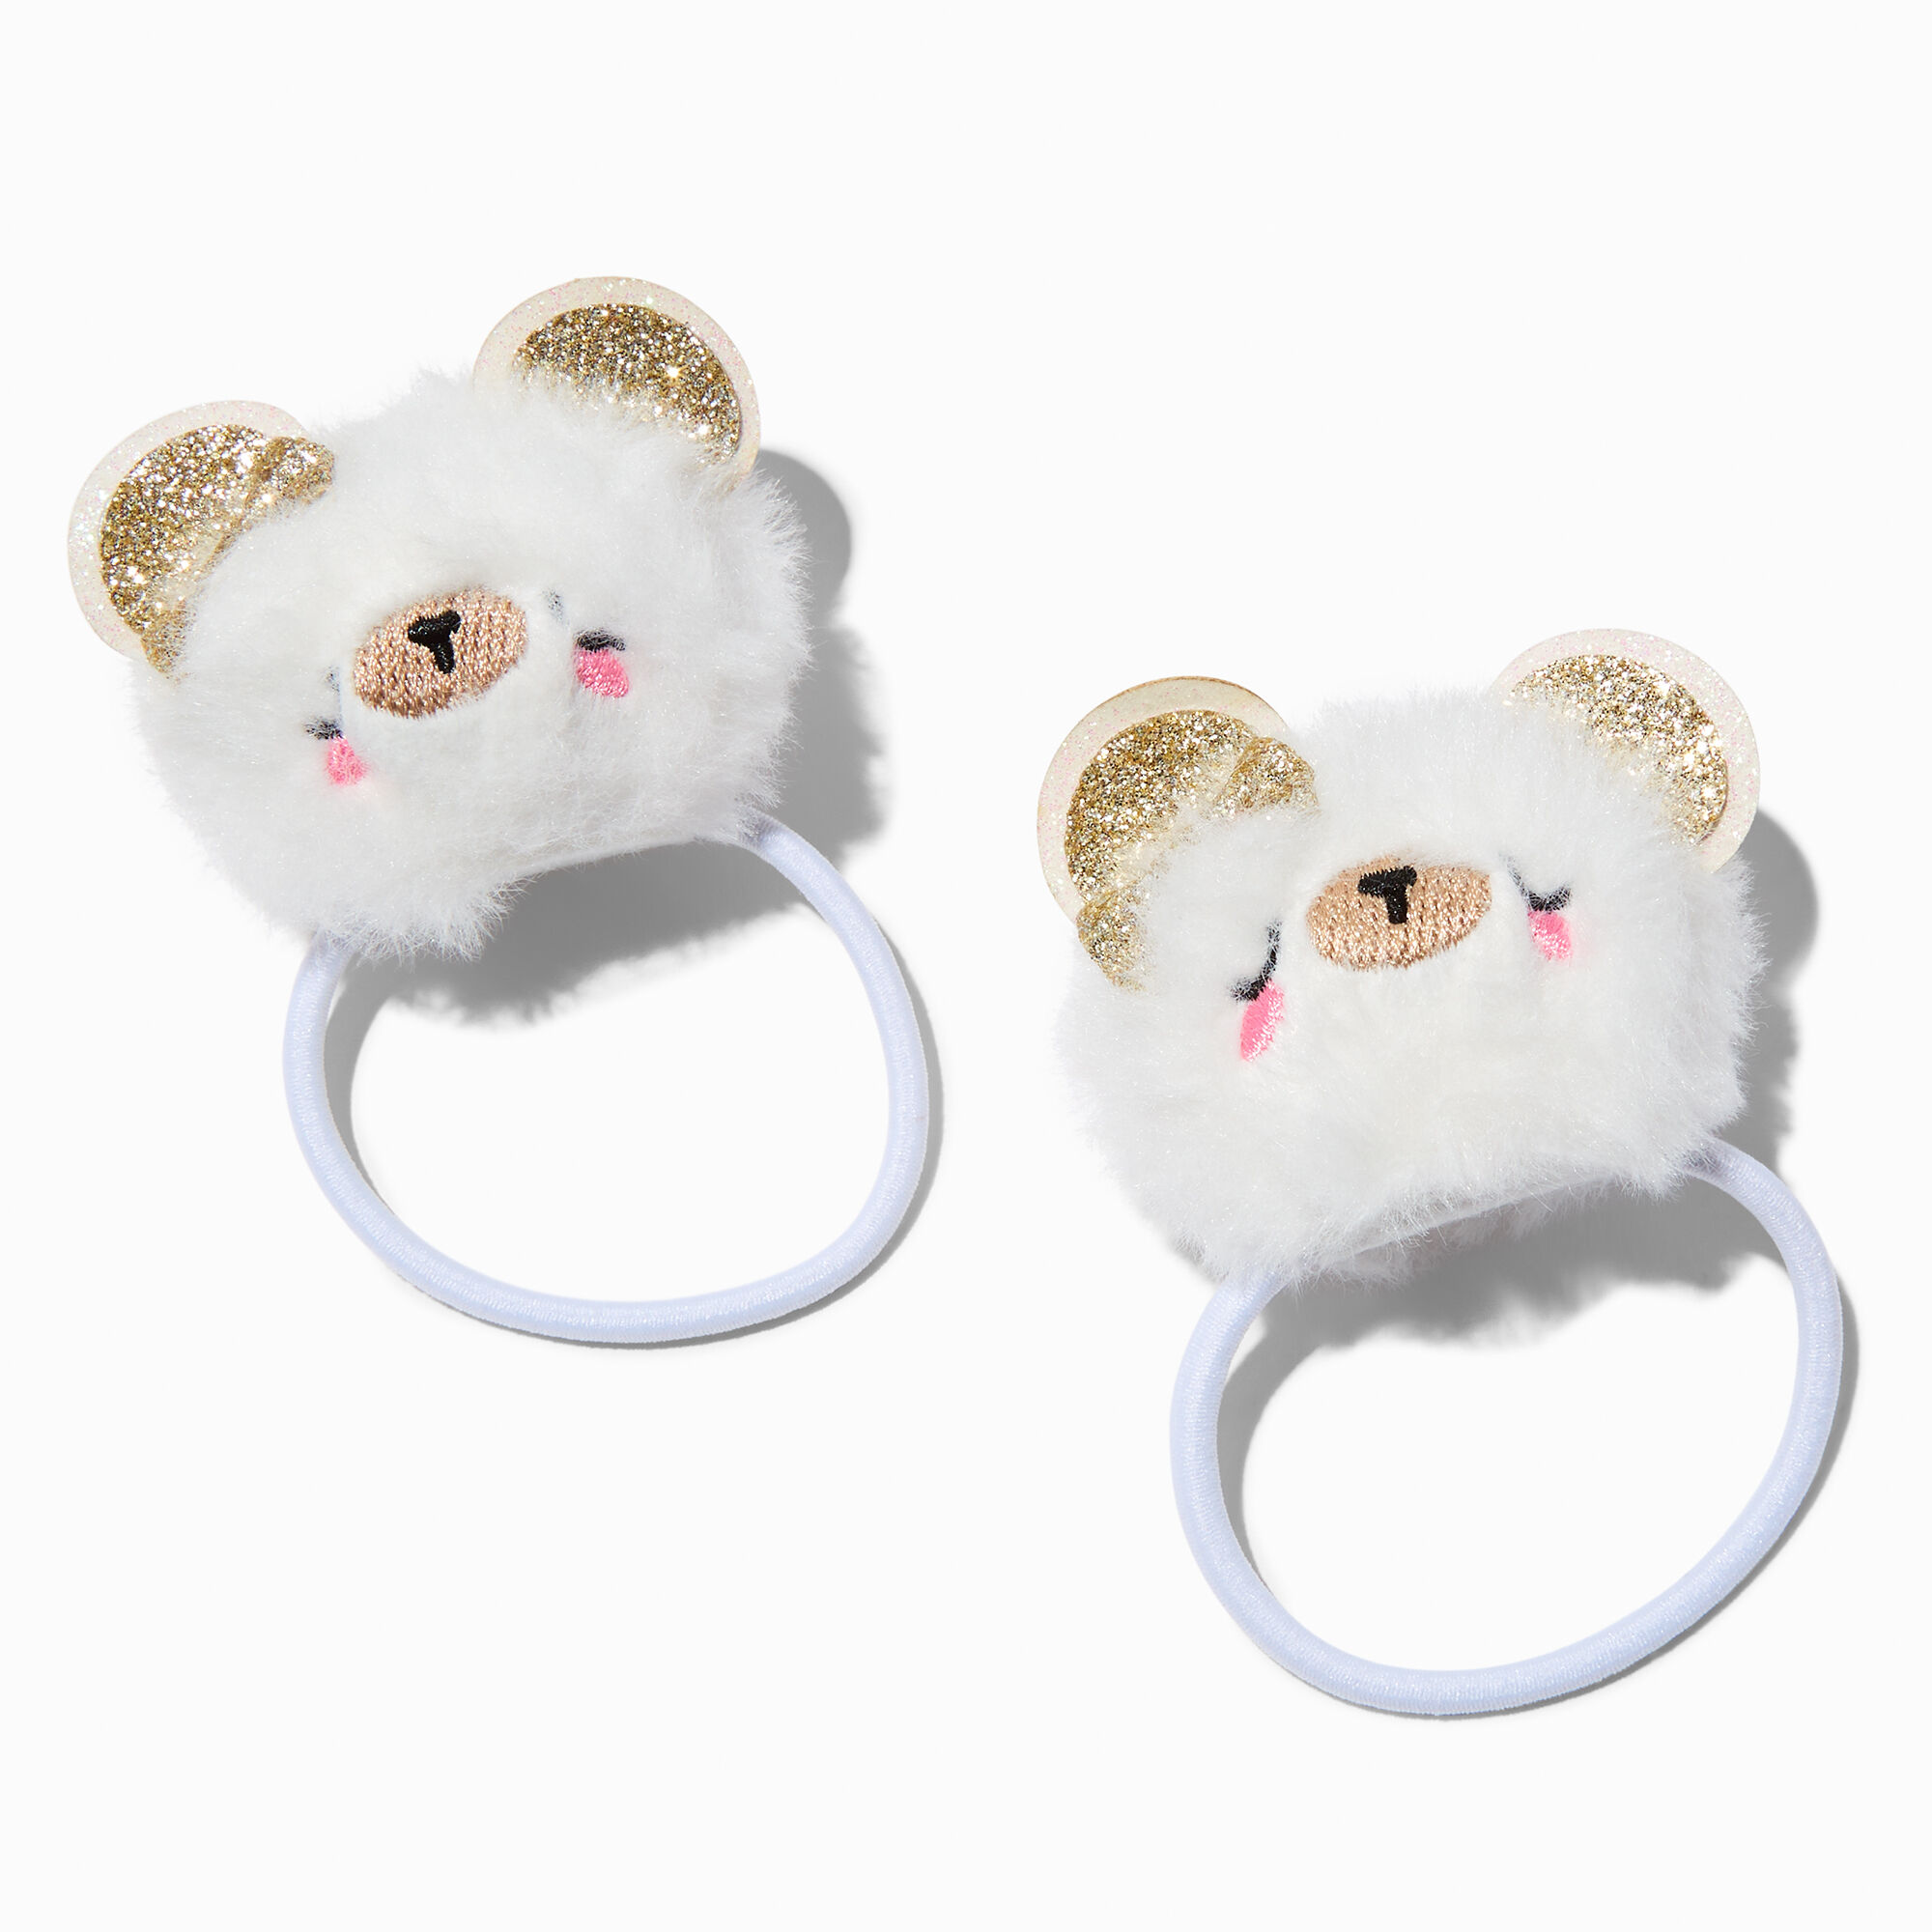 View Claires Club Glitter Bear Pom Hair Ties 2 Pack Gold information